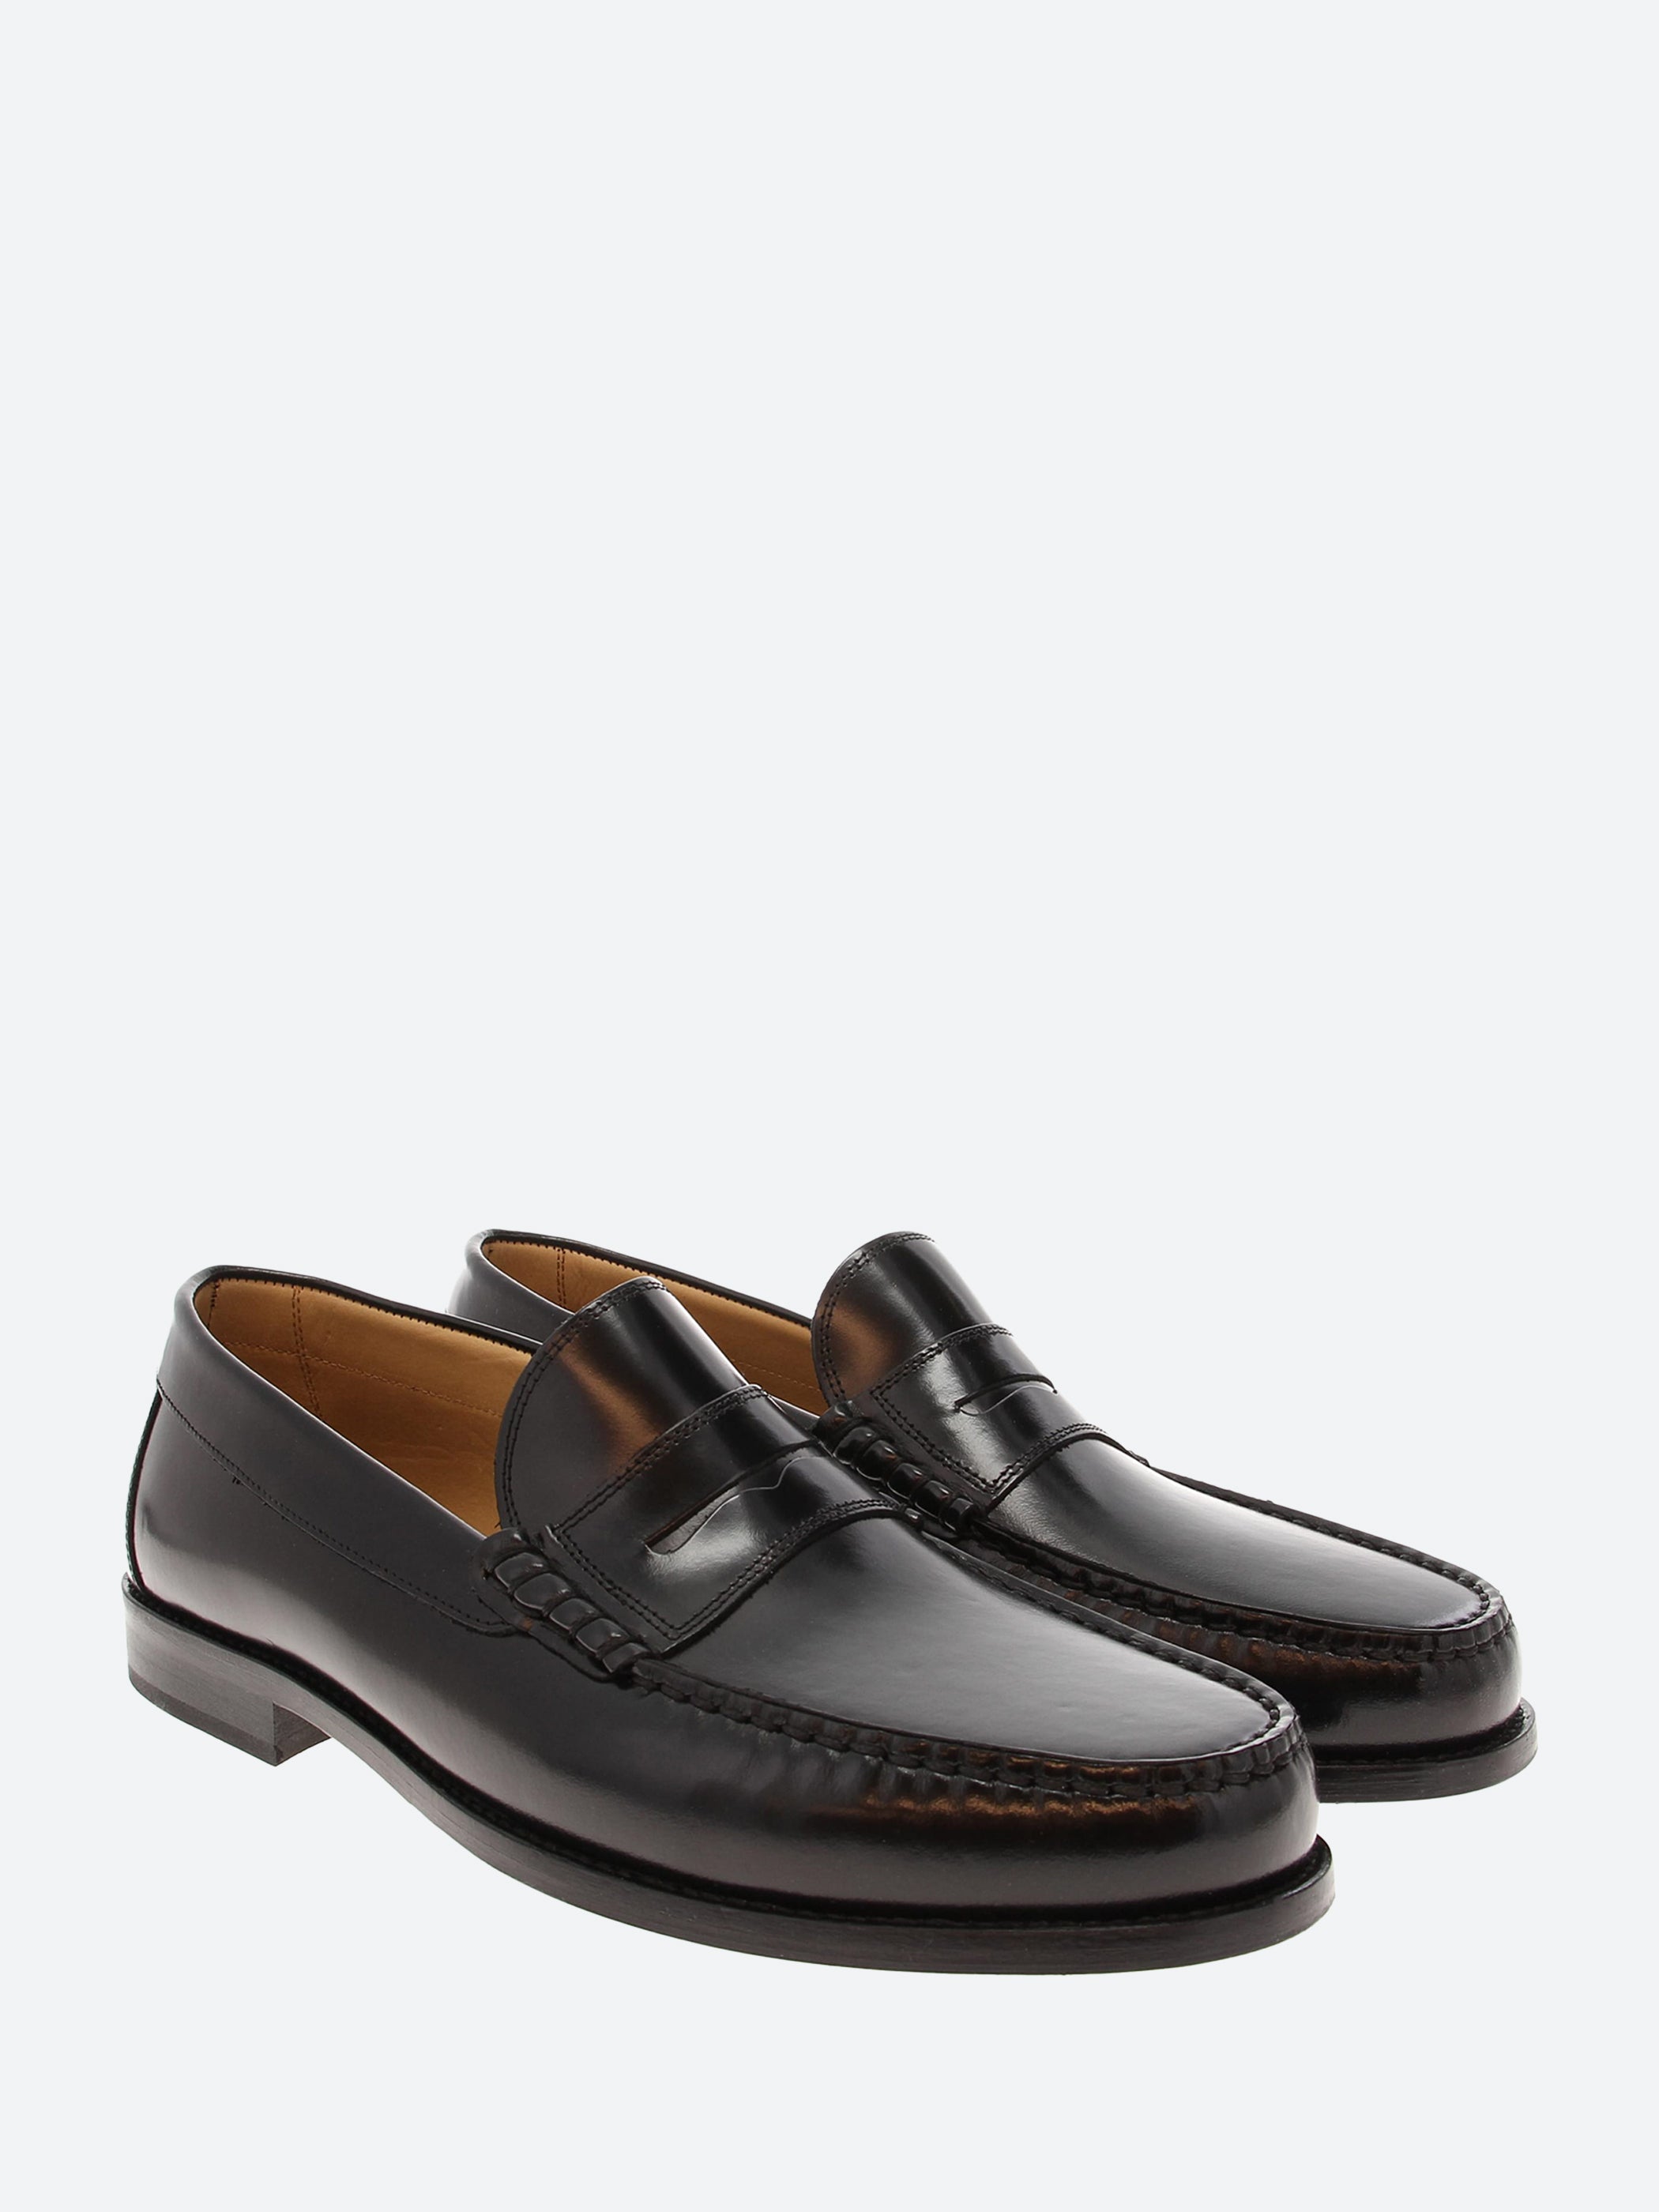 Sesa - New York Penny Loafers in Licorice – gravitypope